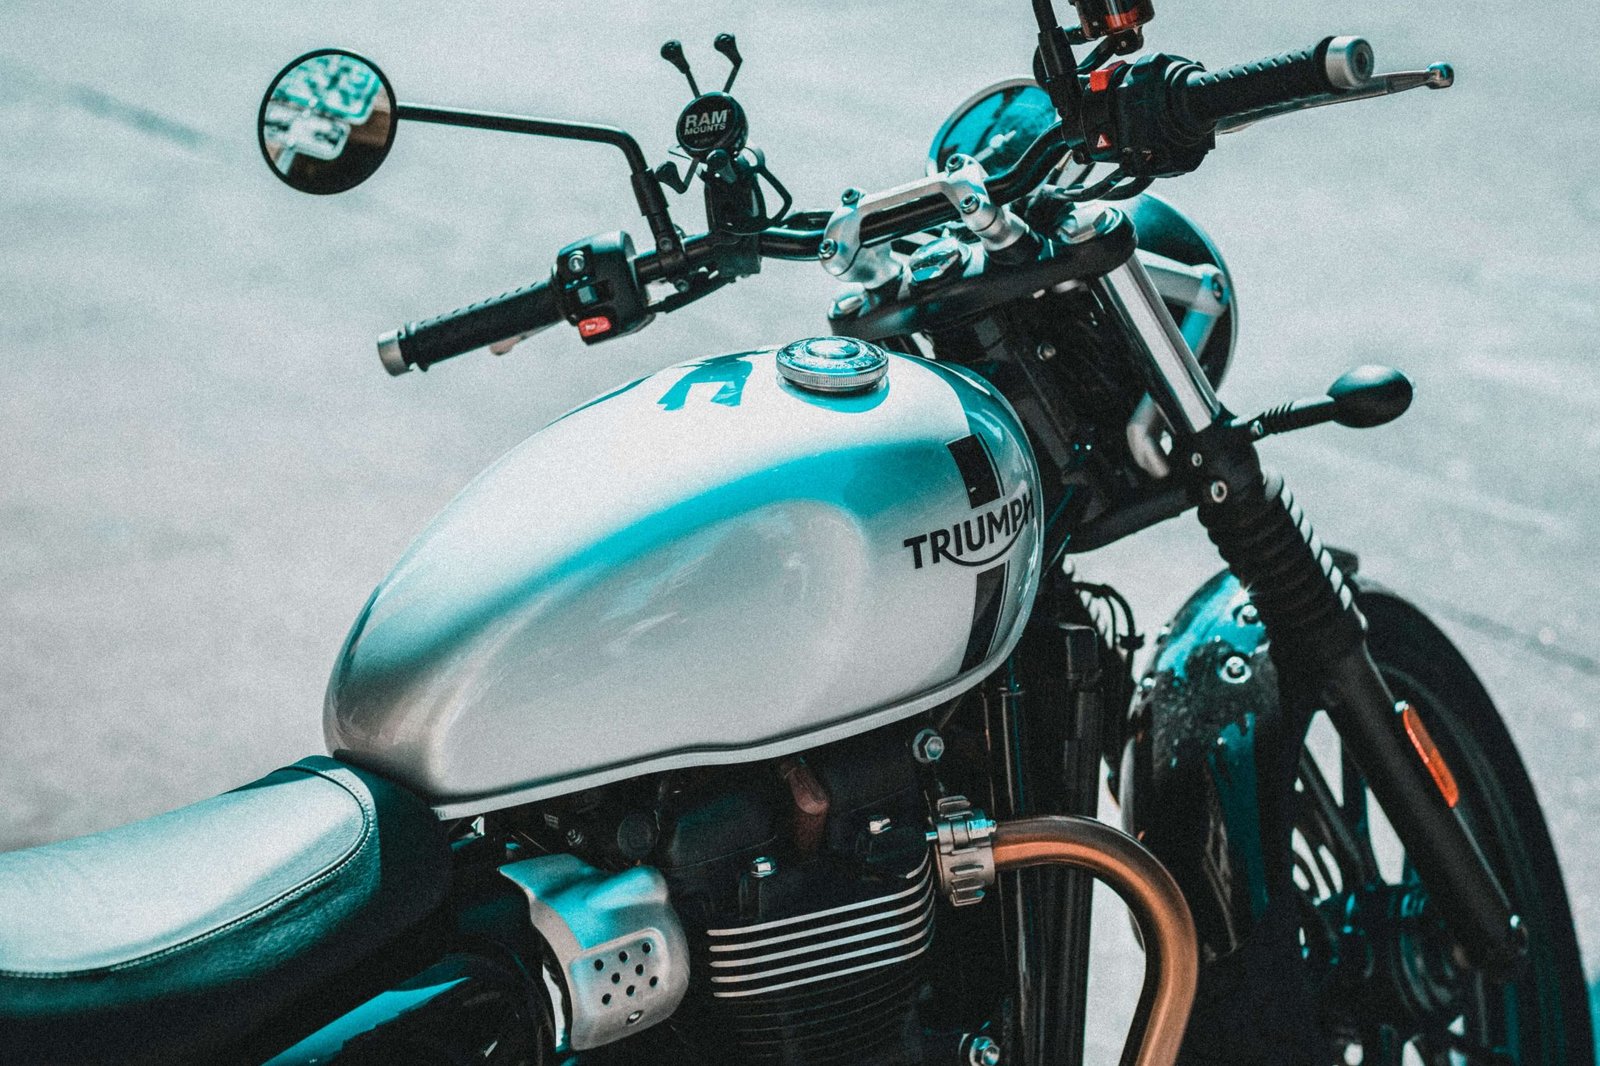 TOP 10 Best Motorcycle Brands In The World